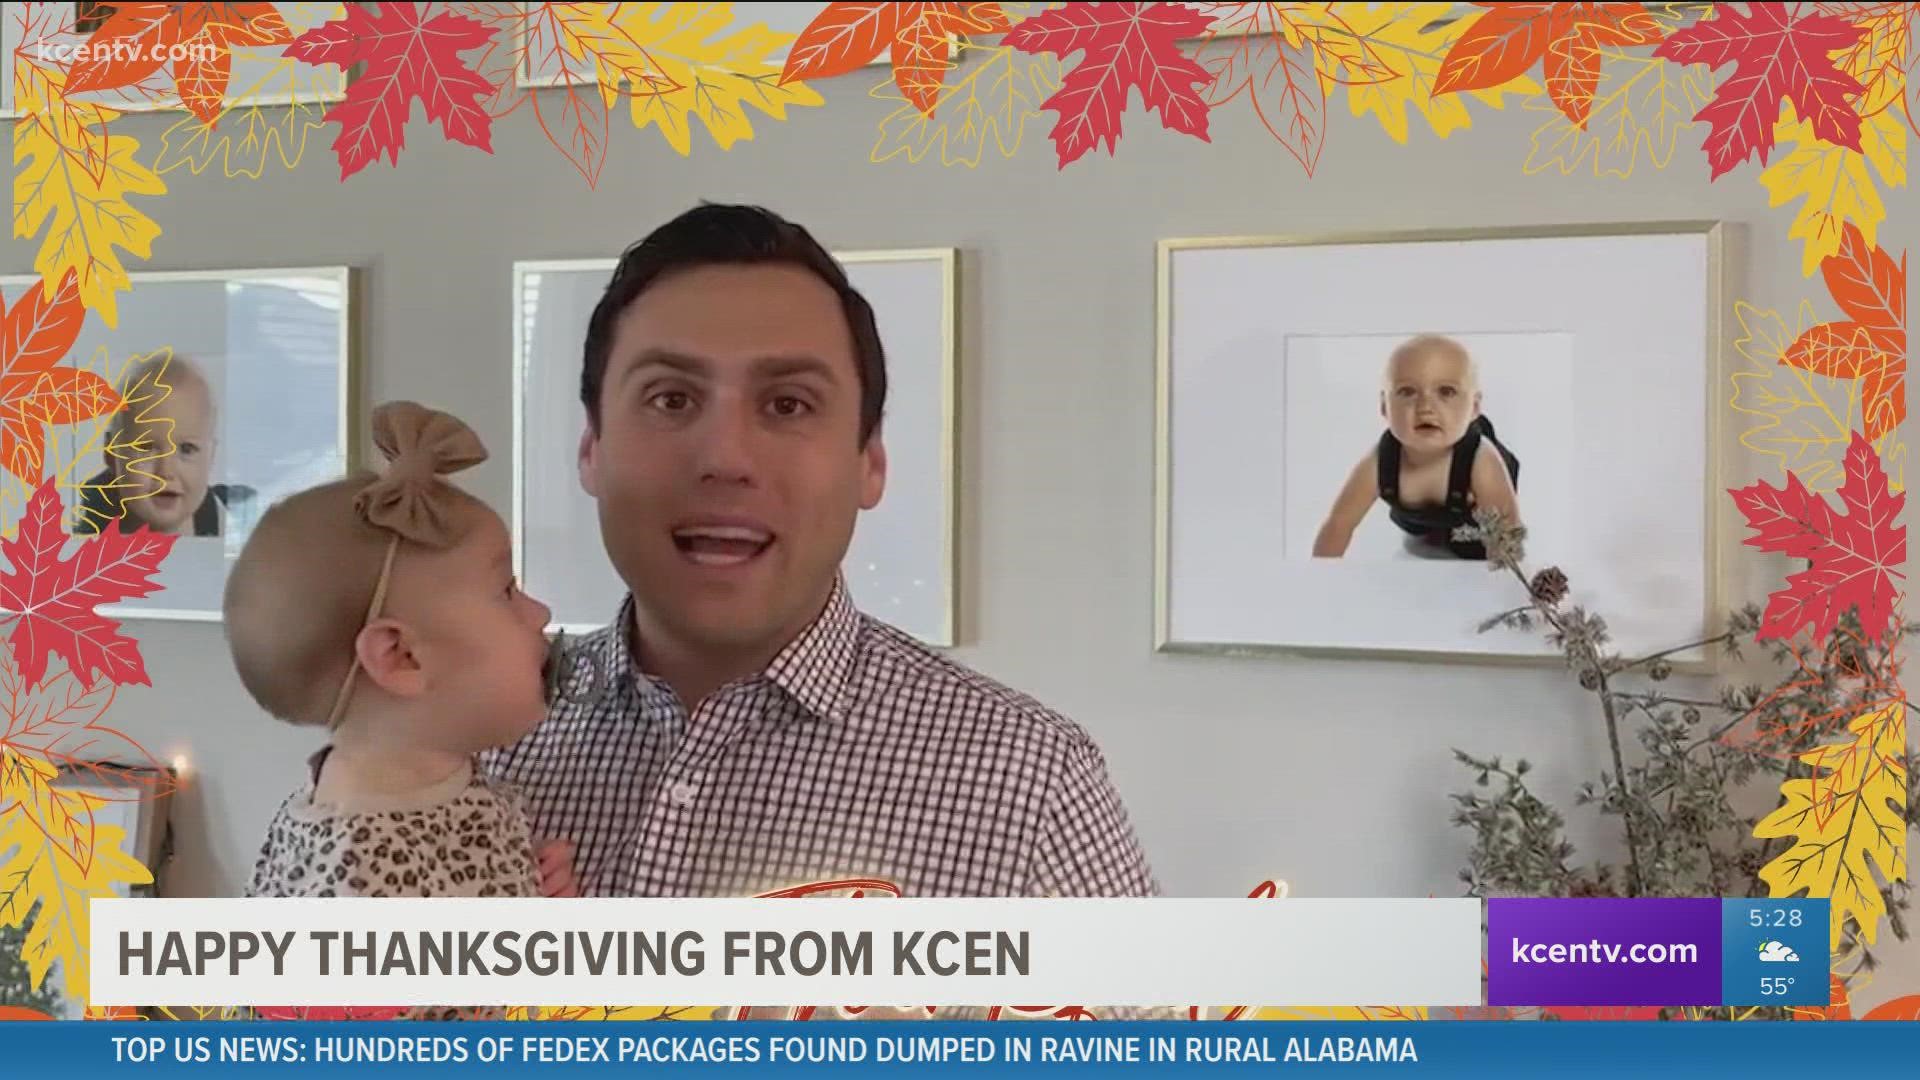 Here's what KCEN is thankful for this year. Happy Thanksgiving!